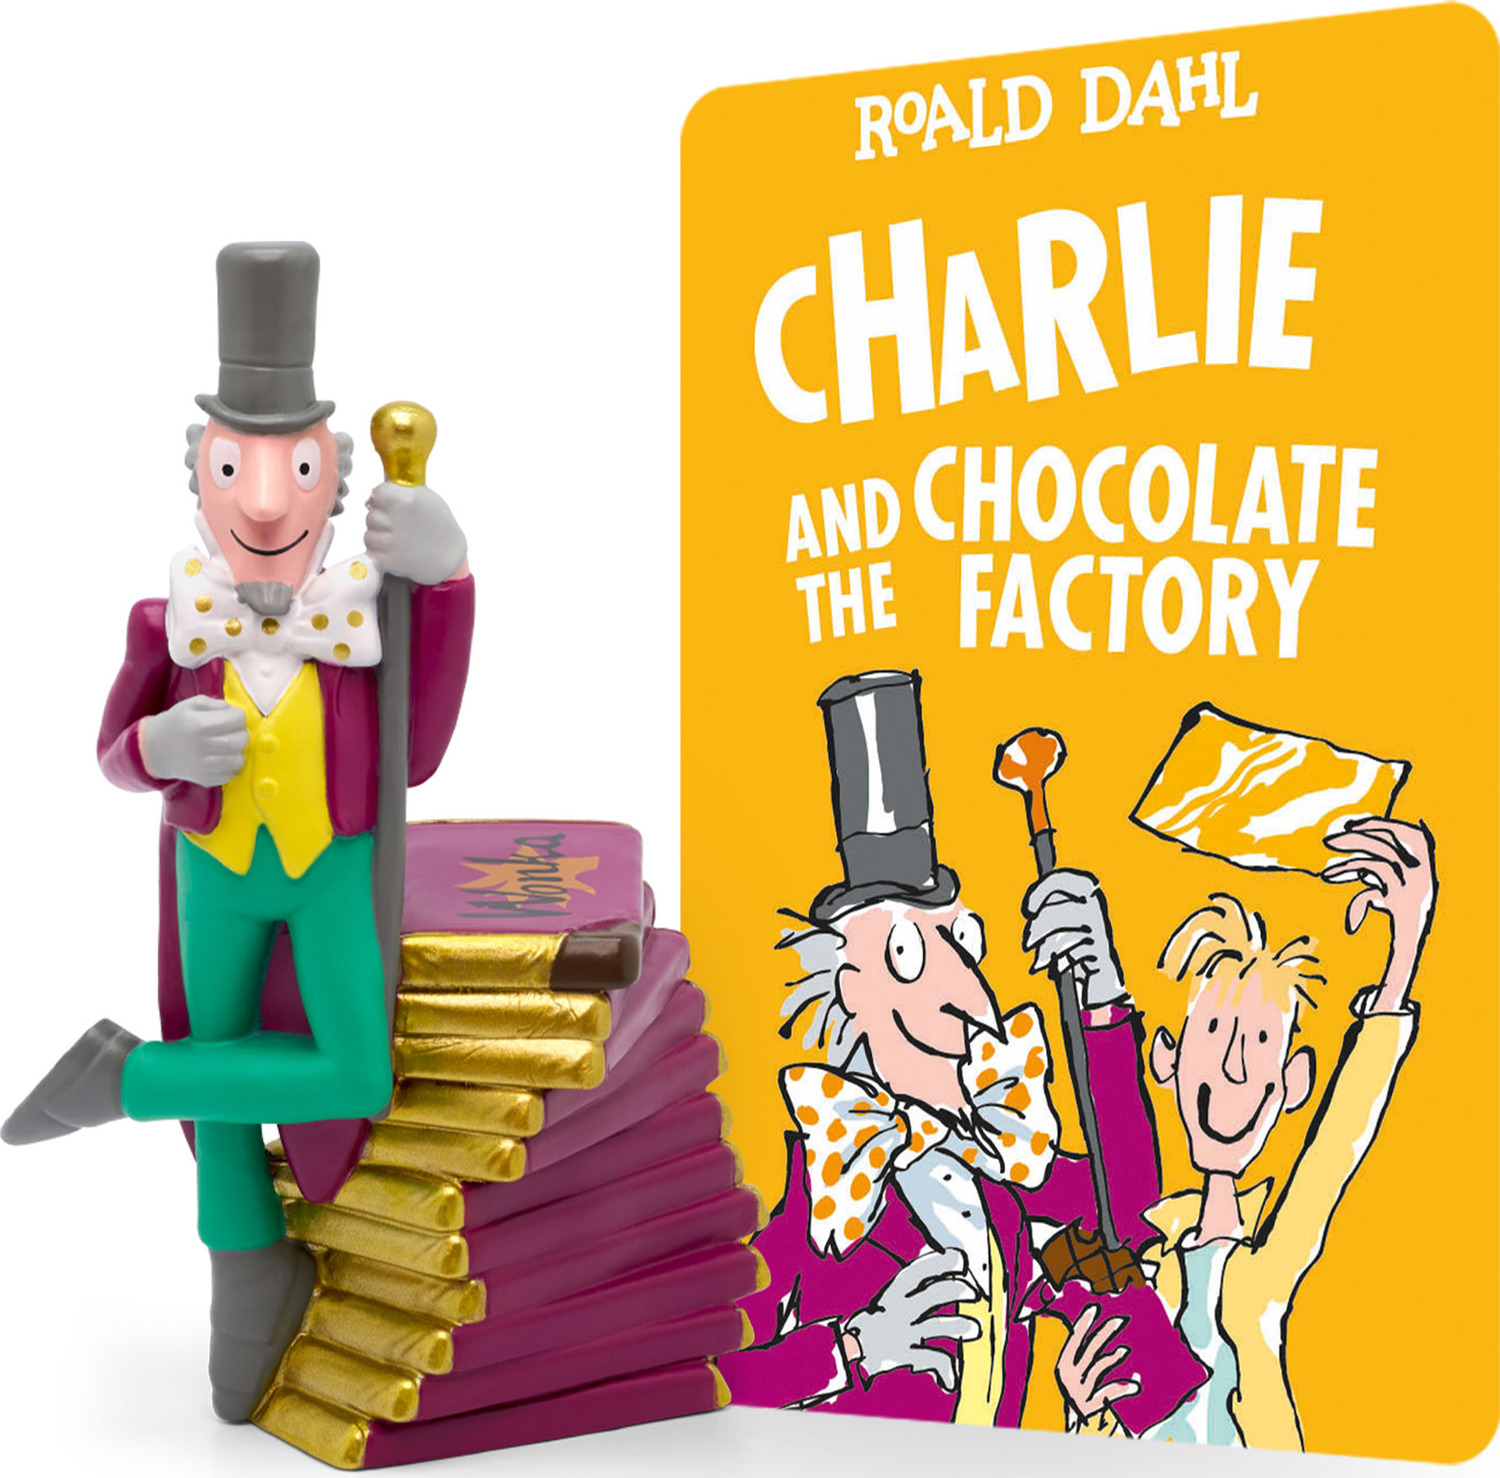 Roald Dahl's Charlie and the Chocolate Factory - Tuacahn Center for the  Arts (OFFICIAL)